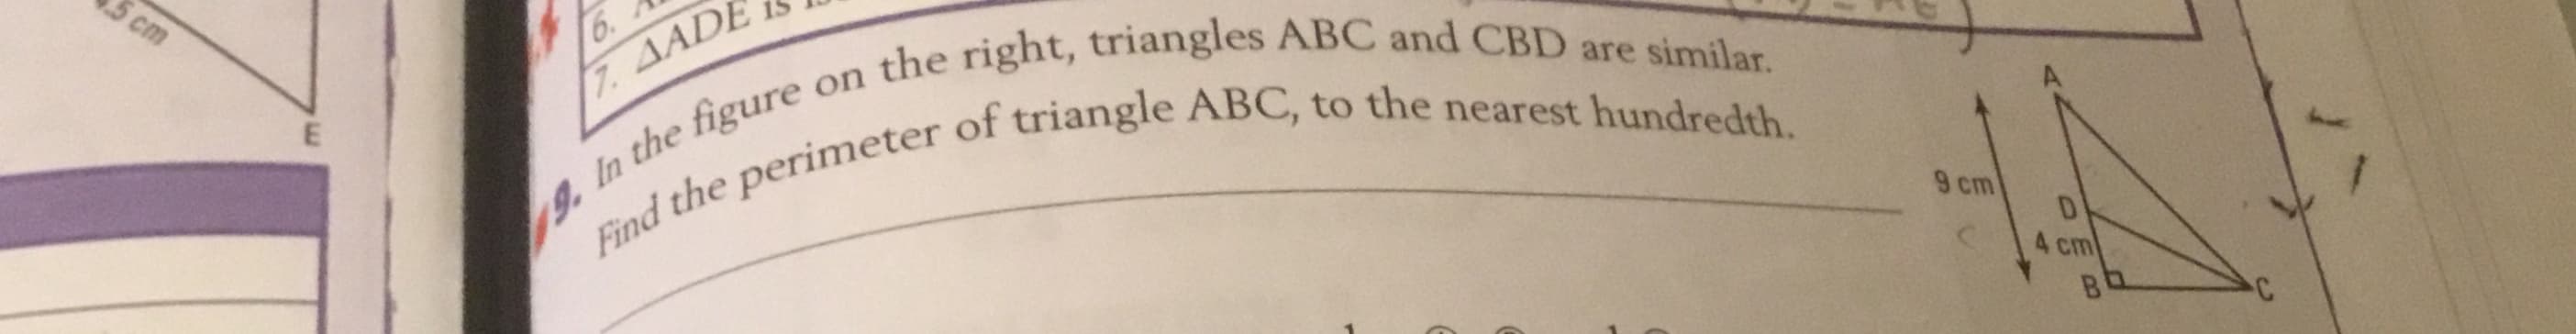 6.
19. In the figure e
Find the perimeter of triangle ABC, to the nearest hundredth.
7. AADE
e on the right, triangles ABC and CBD are similar.
9 cm
4 cm
B
